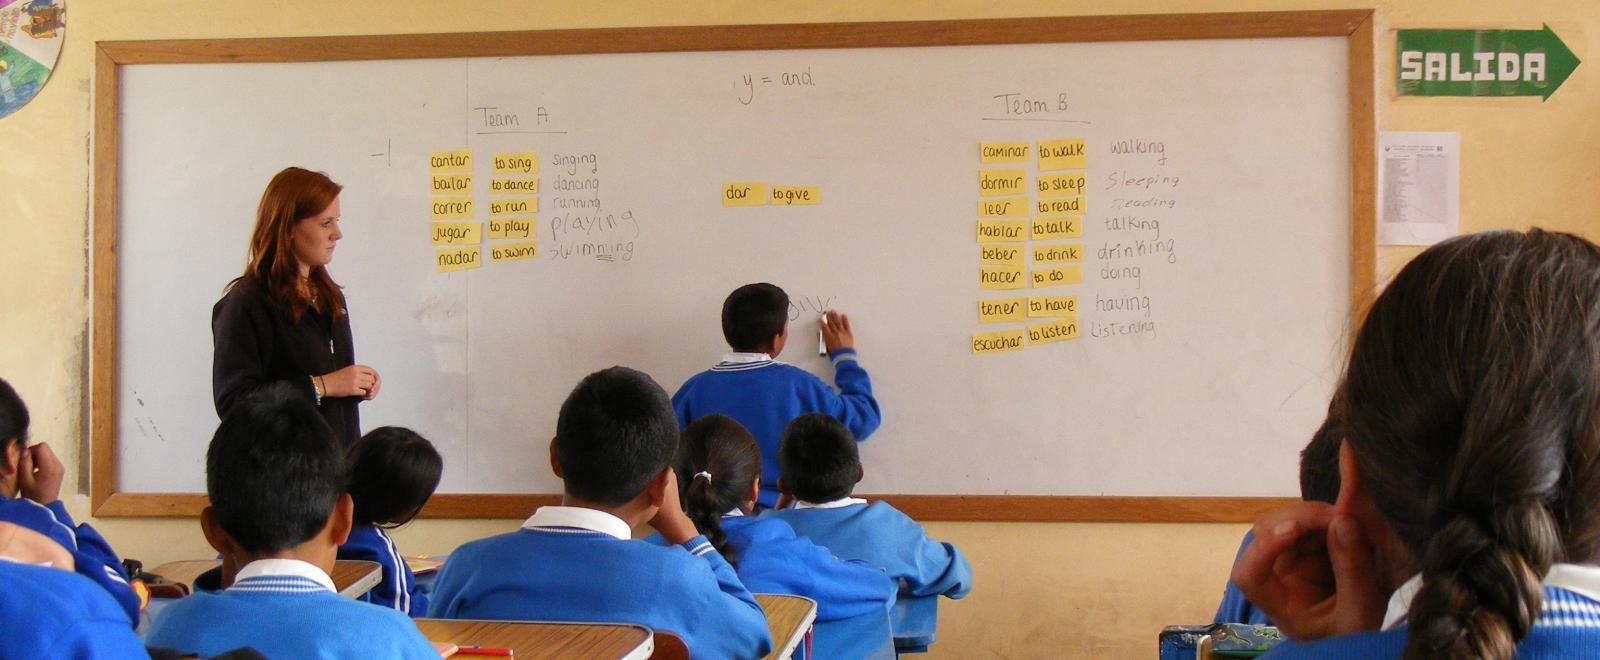 A student finishes an English exercise on the white board at a volunteer teaching placement in Peru.